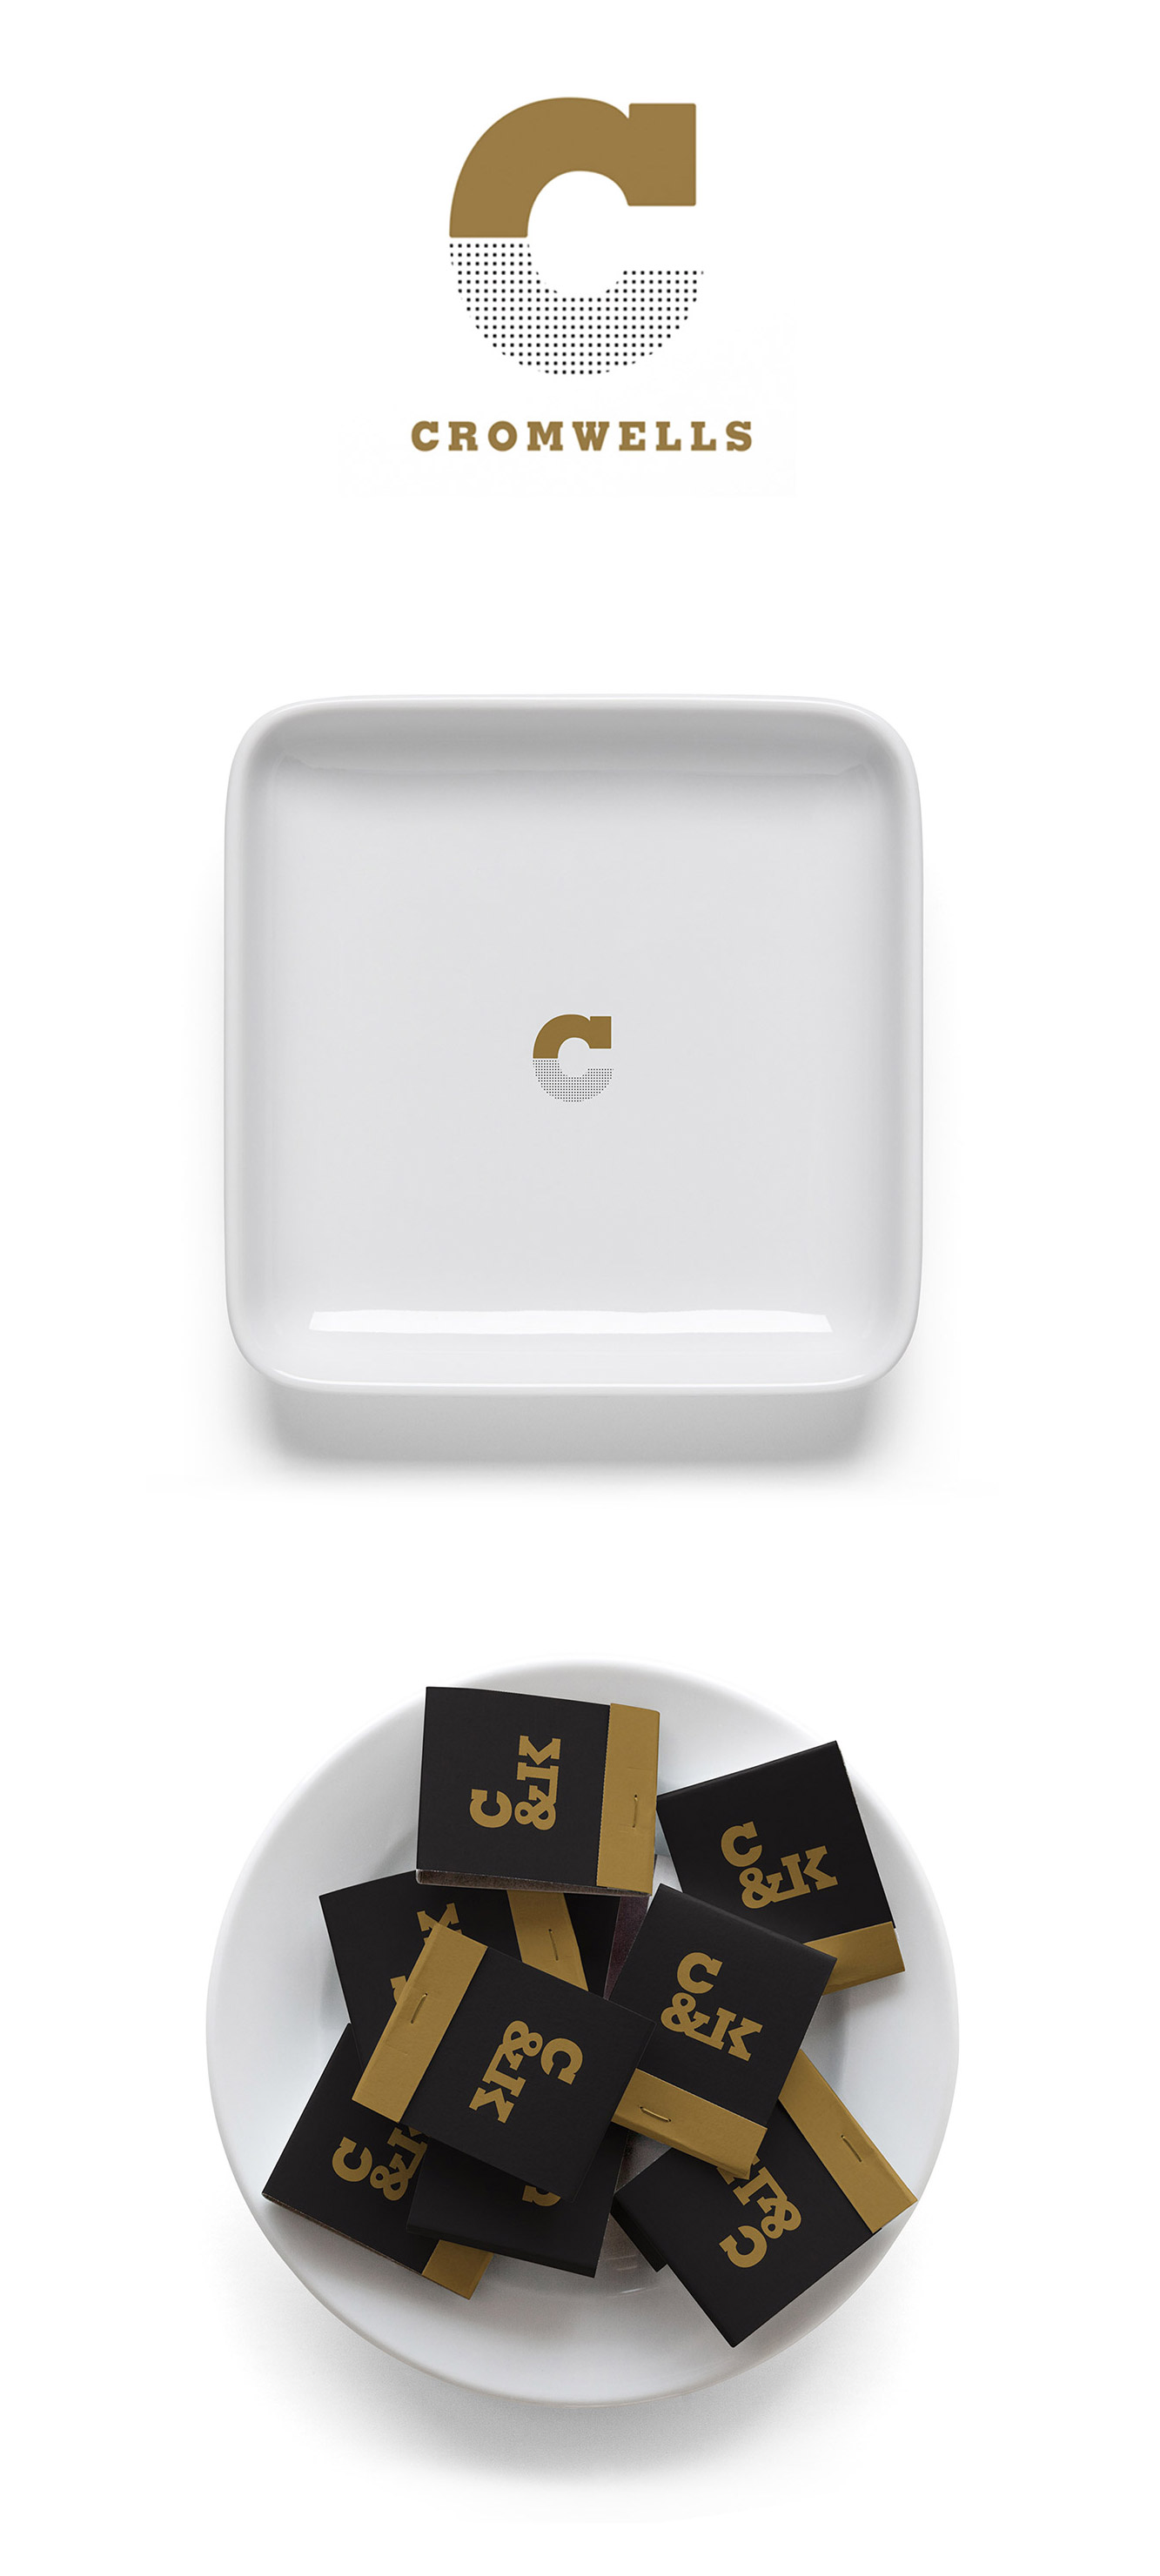 Cromwells logo, ash tray with the logo, and bowl with black and gold matches with the logo.